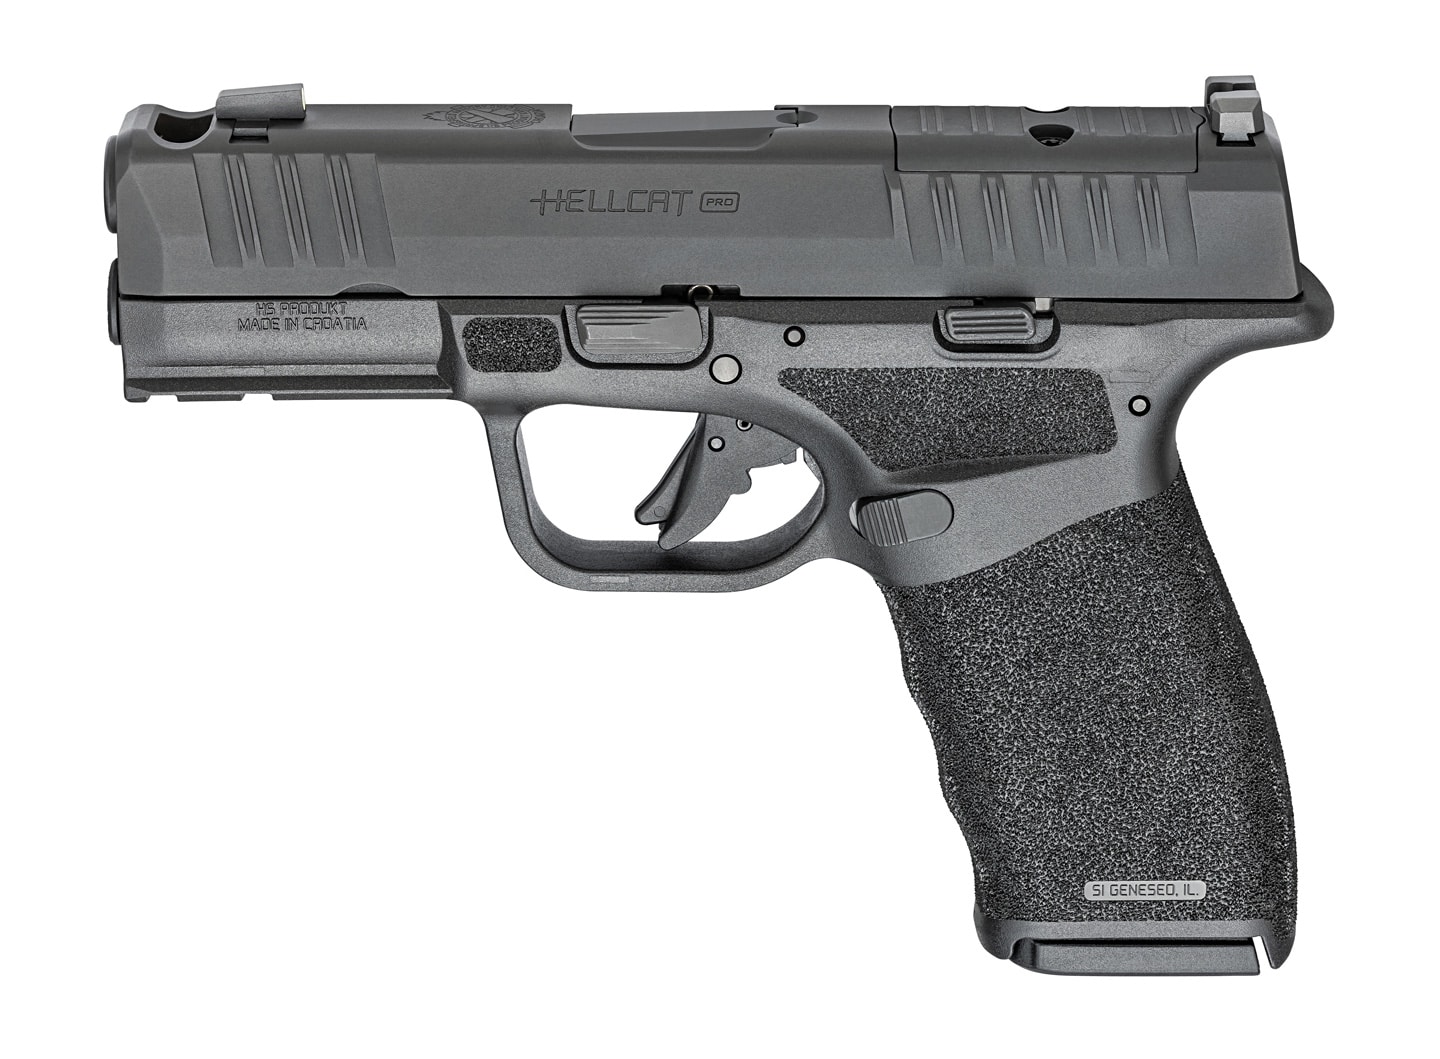 In this photograph we see the Springfield Armory Hellcat Pro Comp, which is a semi-automatic pistol chambered in 9x19mm Parabellum. It features the company's Adaptive Grip Texture.